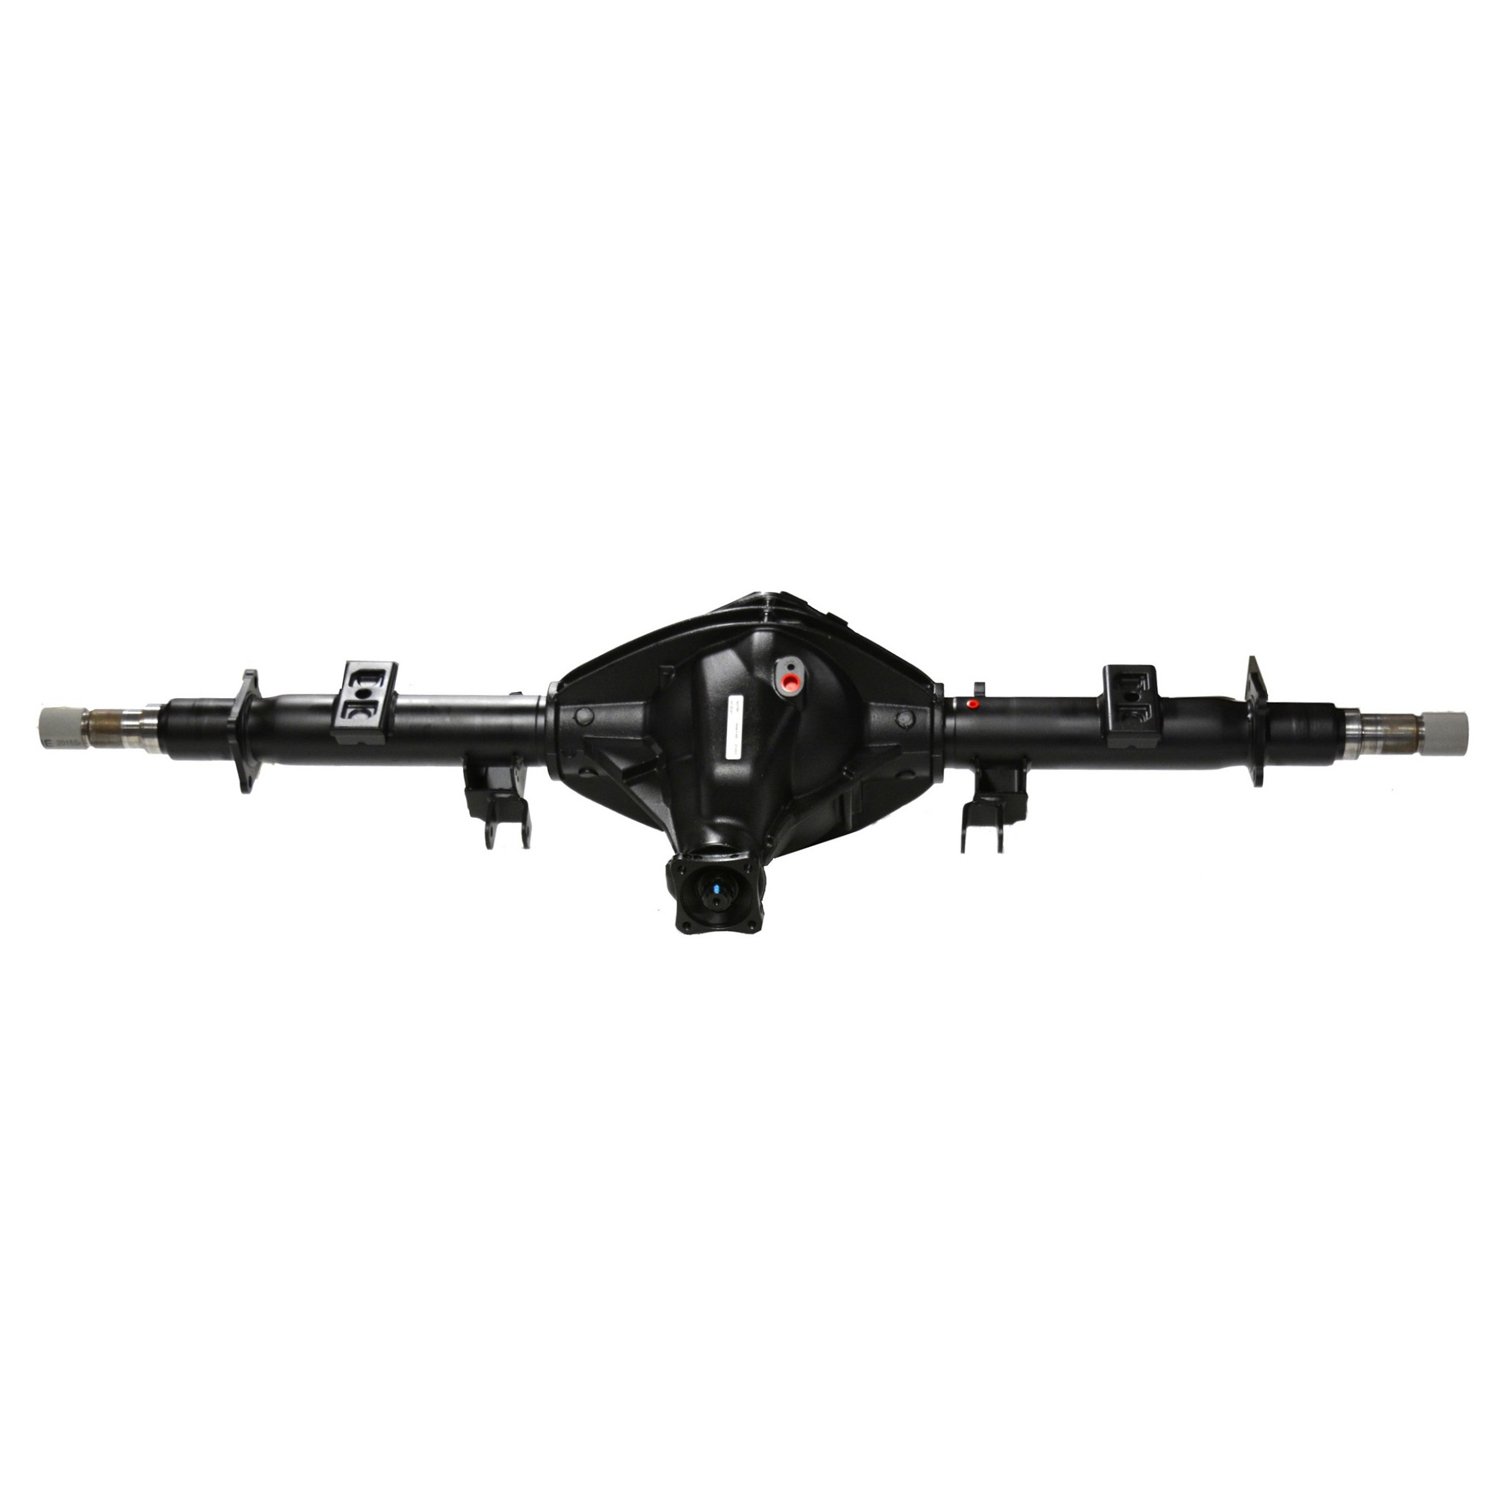 Remanufactured AAM 11.5" AXLE ASSY '07-'08 CHY RAM SRW 3500 CAB CHASSIS, 4.10, 2WD & 4WD, POSI